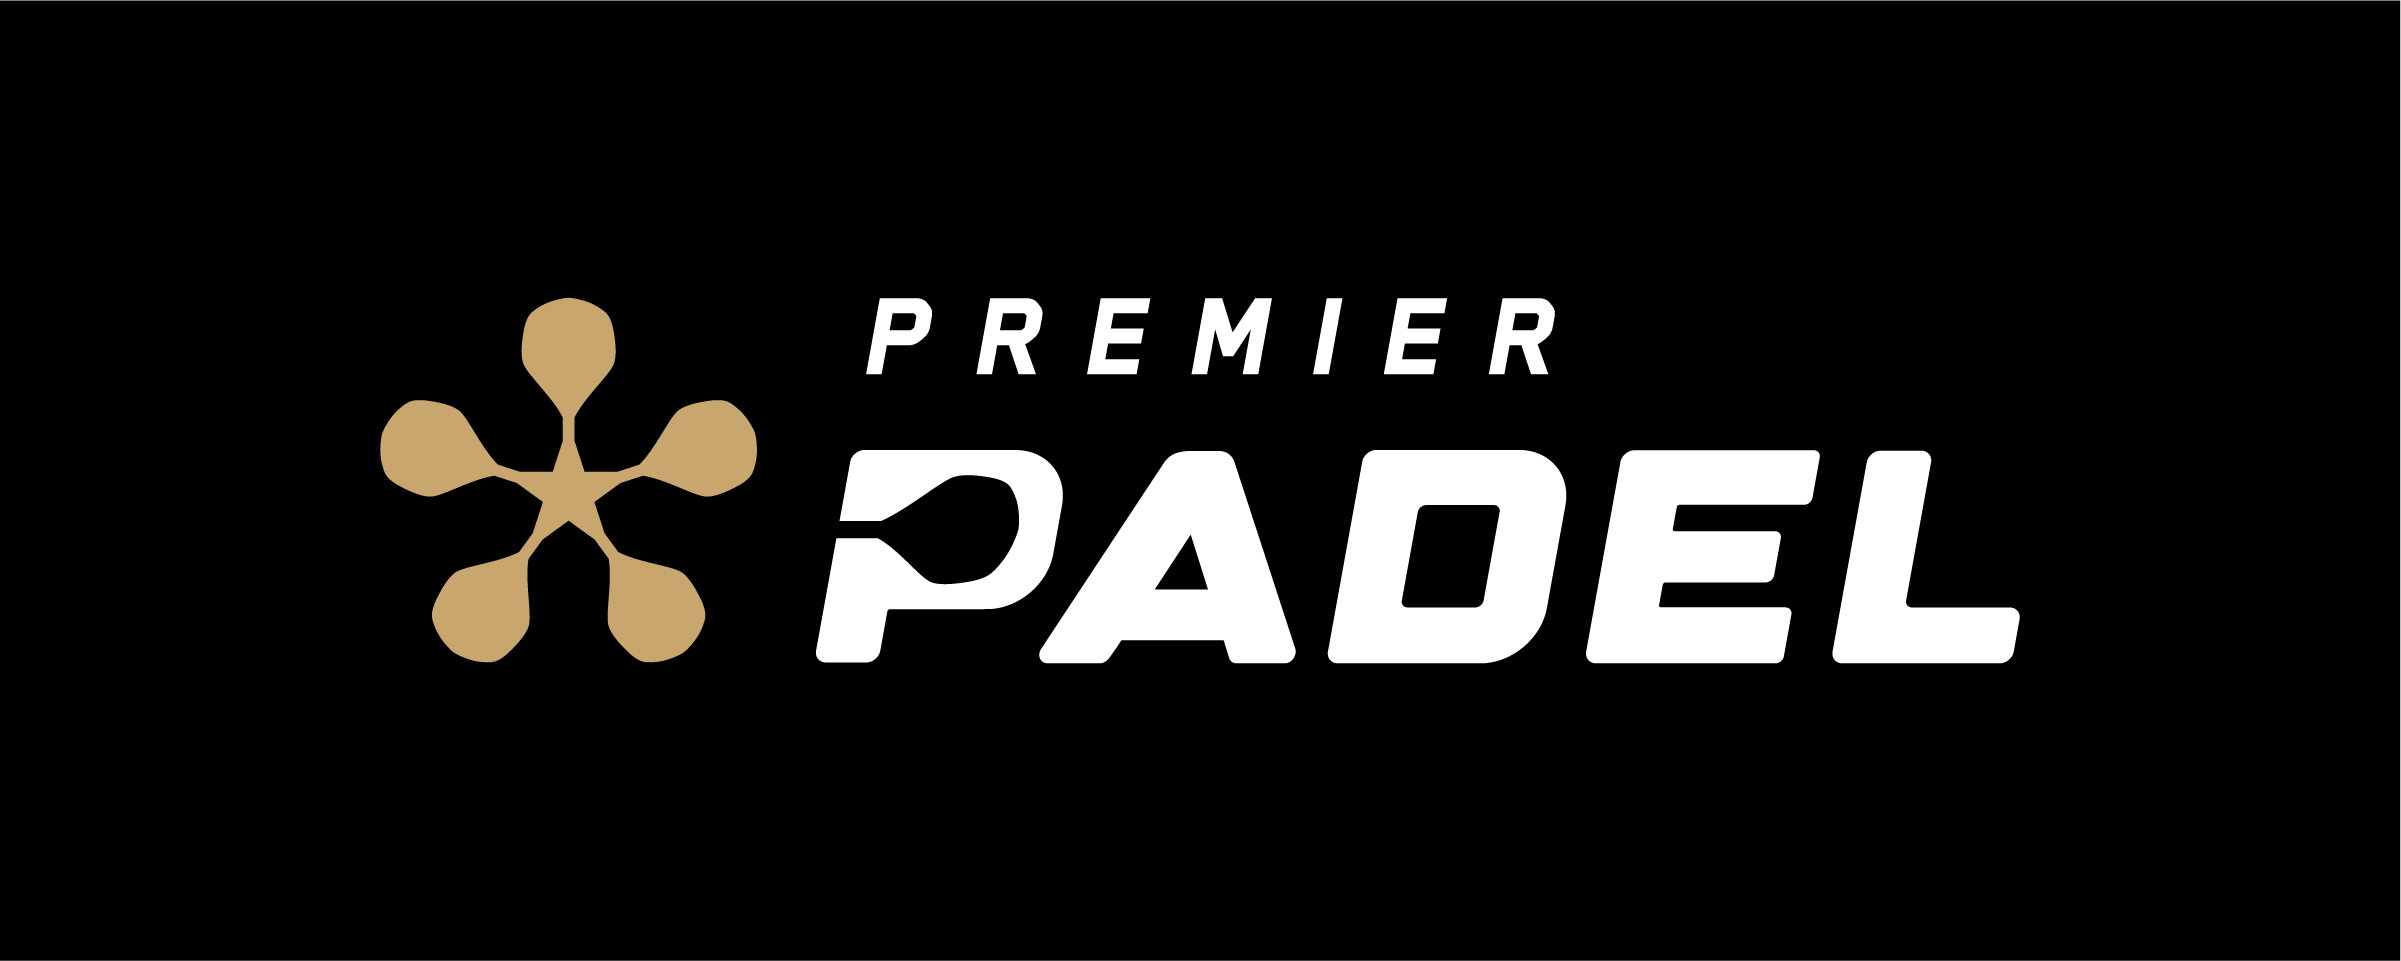 Premier Padel responds to the WPT legal attack!